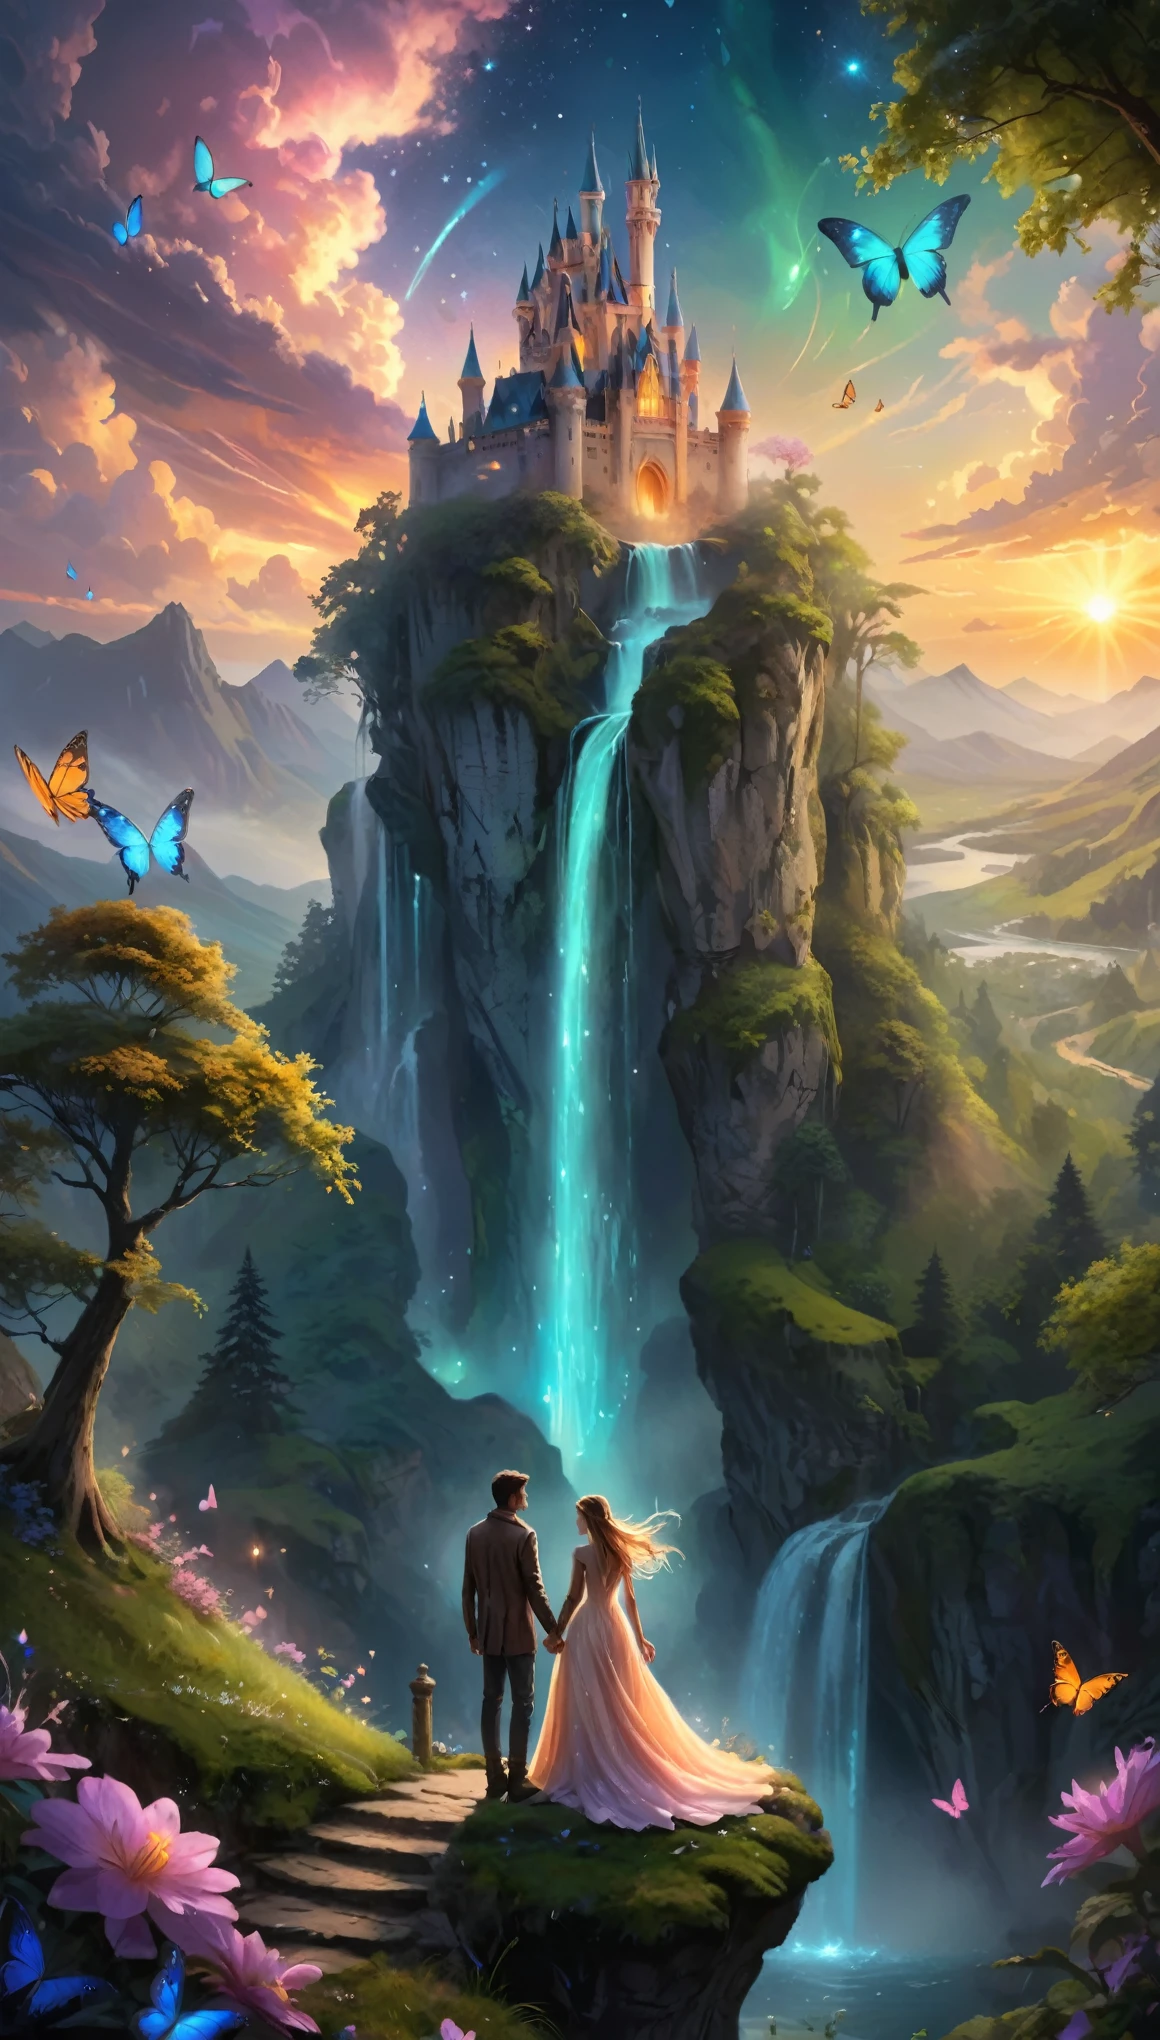 (best quality,8k,highres,masterpiece:1.2),ultra-detailed,(realistic,photorealistic,photo-realistic:1.37),fantasy,couple,man and woman,travelers,standing together on the edge of the world,beautiful fantasy landscape in front of them,digital painting,lovers holding hands,intense chemistry and eye contact,dreamy atmosphere,lush green hills,mythical creatures,breathtaking waterfalls,glowing flowers floating in the air,enchanted forest,magical floating islands,colorful butterflies fluttering around,sparkling stars in the sky,majestic castle in the distance,golden sunset casting a warm glow,soft sunlight filtering through the trees,mystical aura surrounding the couple,magical artifacts,prominent clouds forming majestic shapes,whispering winds carrying their hopes and dreams, ethereal,otherworldly lighting,powerful light shining from the couple's hands,glittering dust creating a sense of magic,harmonious blend of cool and warm tones,subtle gradients creating depth and dimension,rich and vibrant color palette creating a sense of enchantment,impressive attention to fine details,meticulous strokes capturing their emotions and expressions,imagination come to life,an escape into a mesmerizing fantasy world.